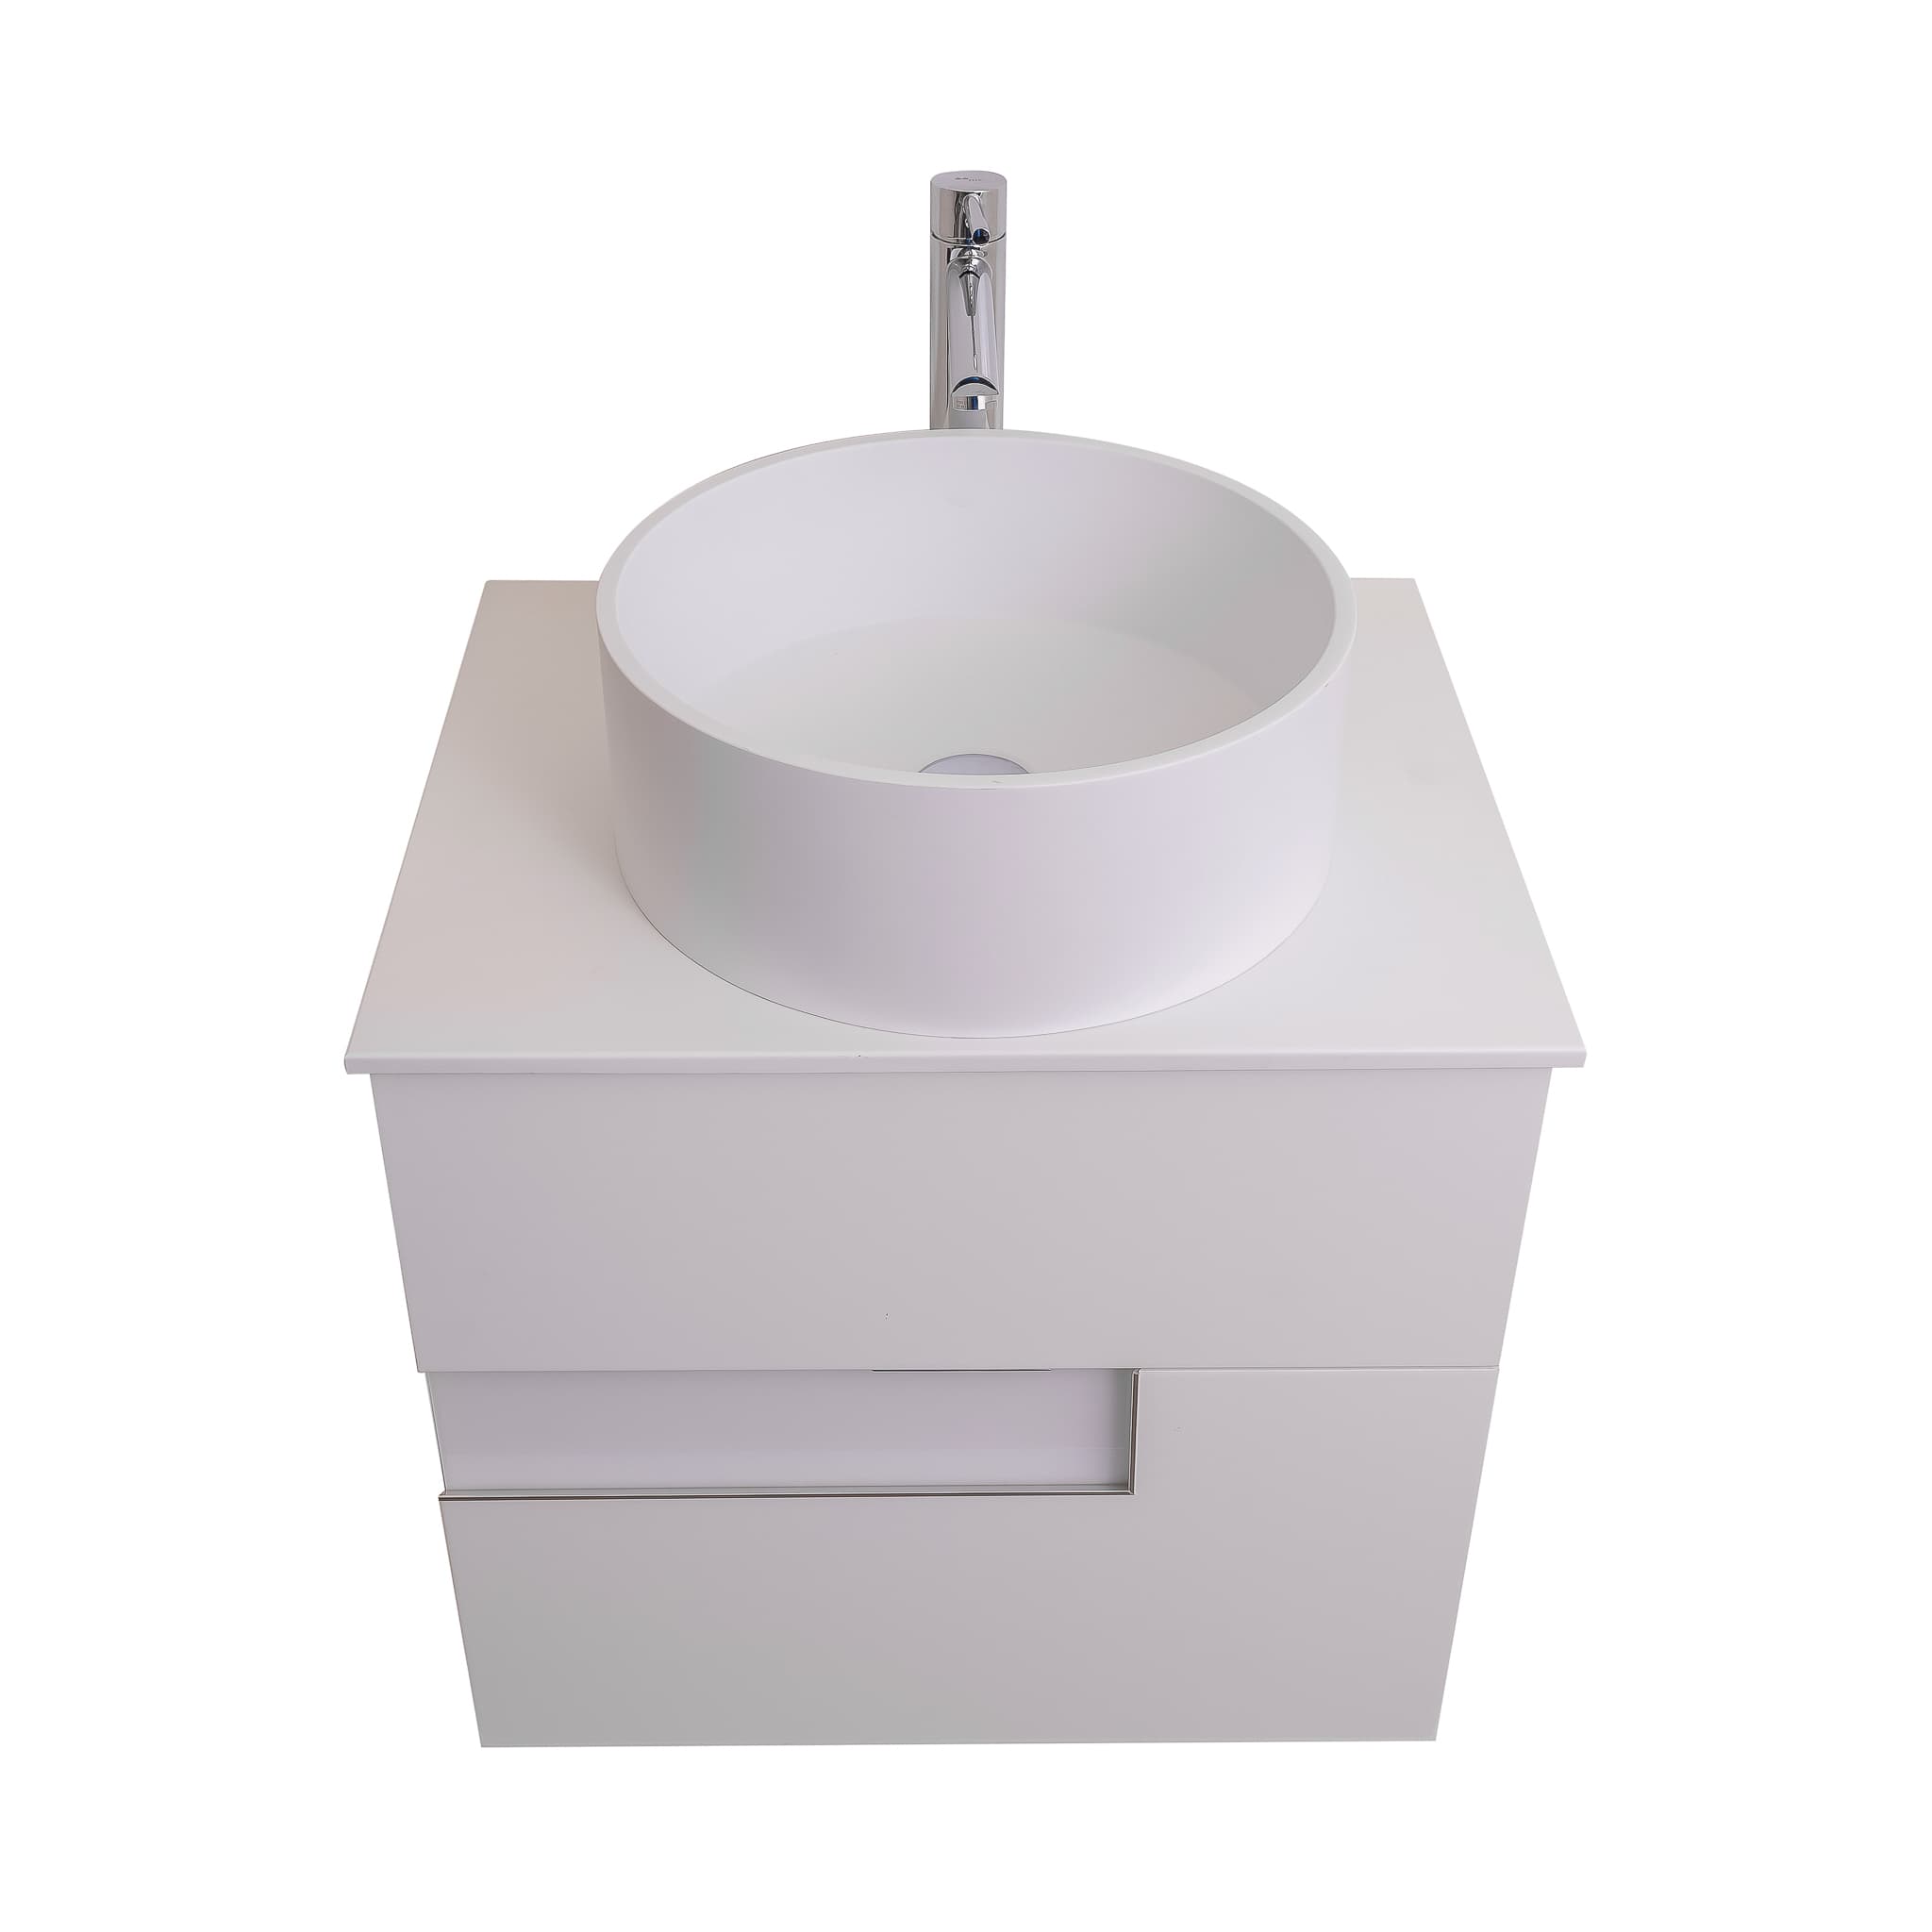 Vision 23.5 White High Gloss Cabinet, Solid Surface Flat White Counter And Round Solid Surface White Basin 1386, Wall Mounted Modern Vanity Set